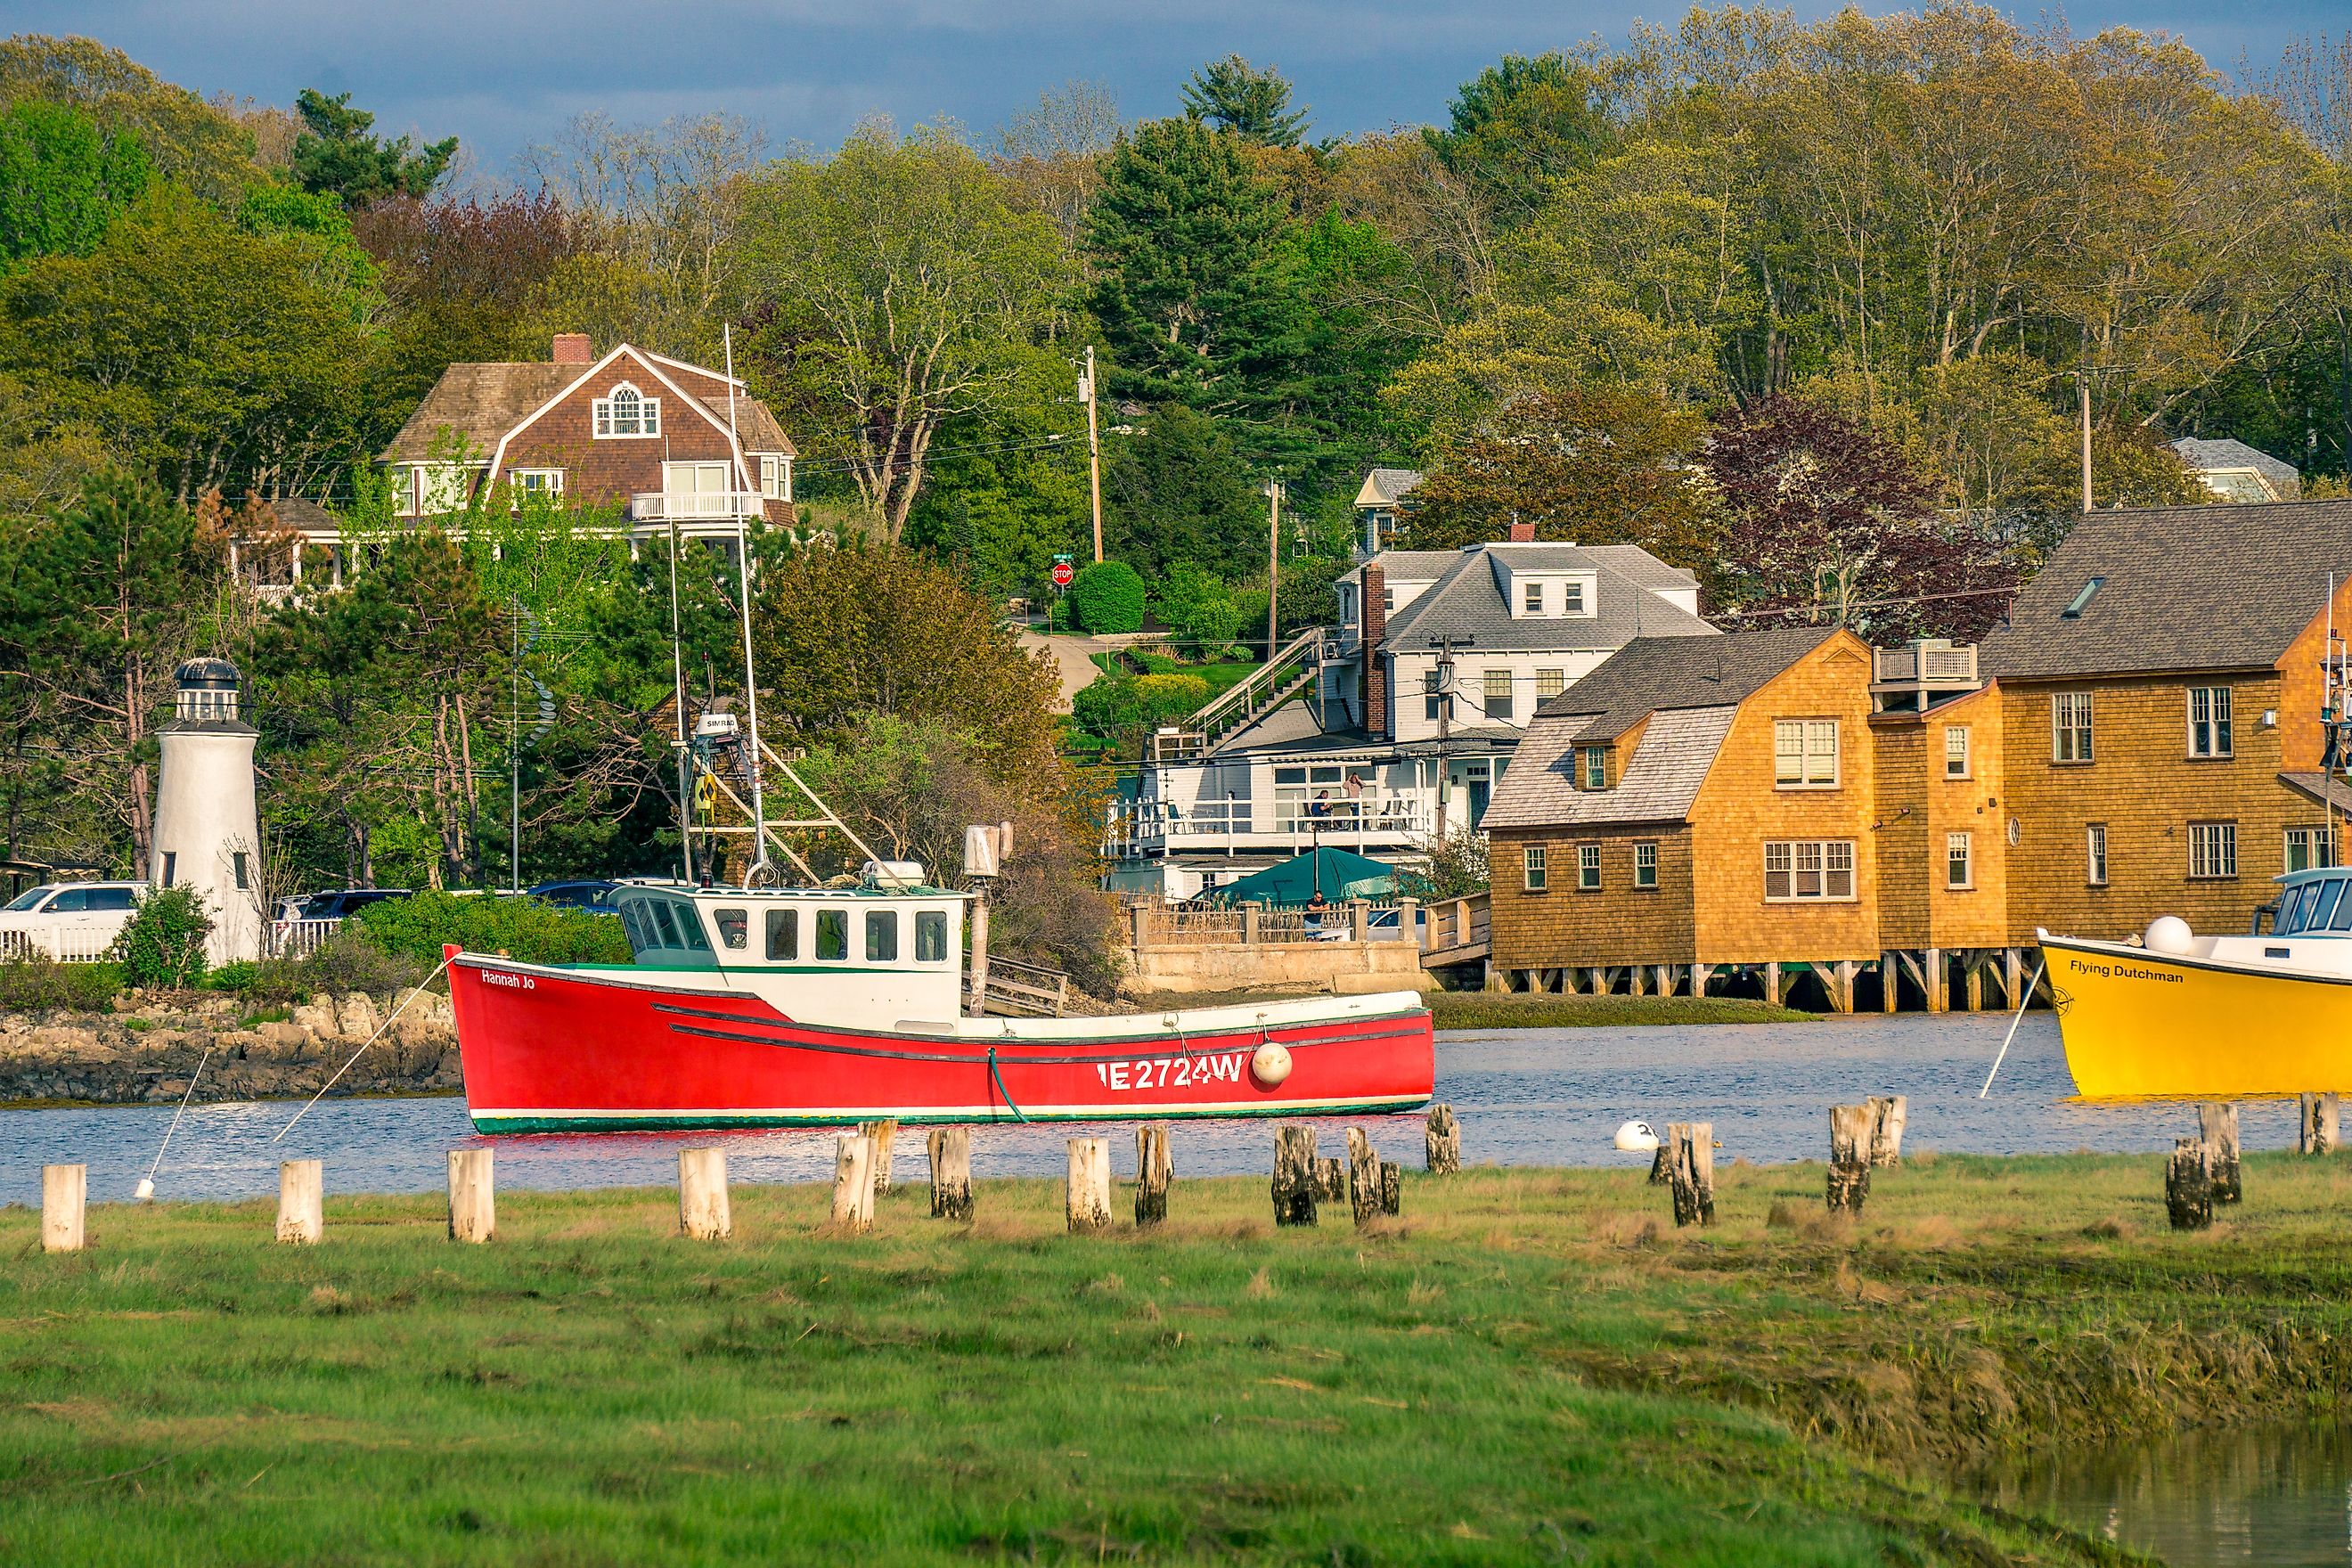 The harbor at Kennebunkport, Maine. Editorial credit: Pernelle Voyage / Shutterstock.com